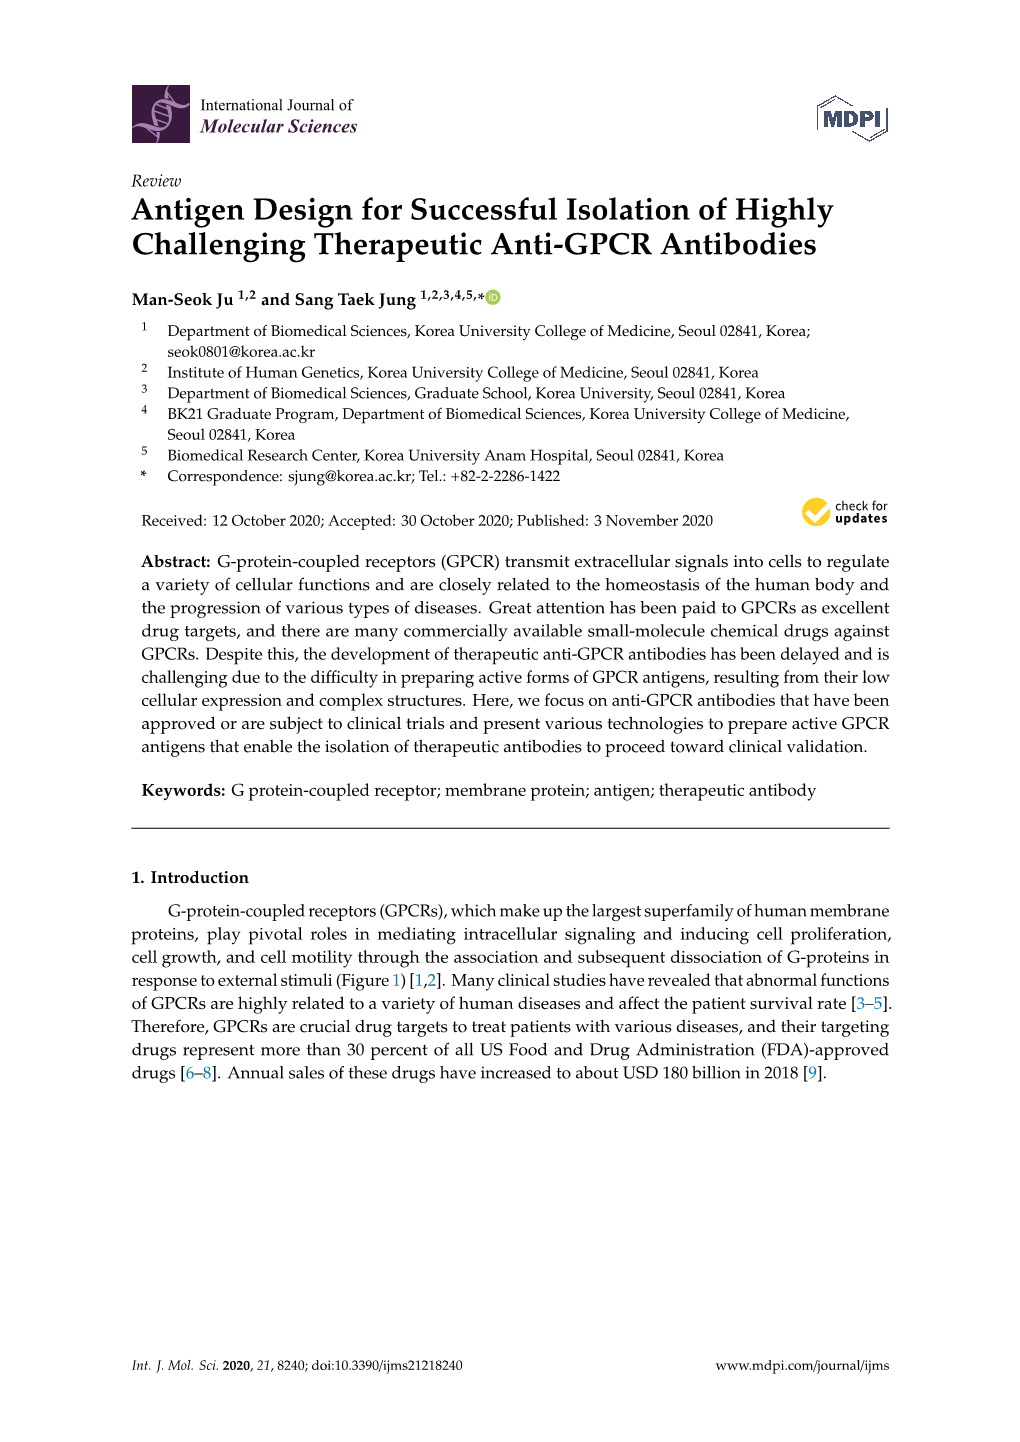 Antigen Design for Successful Isolation of Highly Challenging Therapeutic Anti-GPCR Antibodies